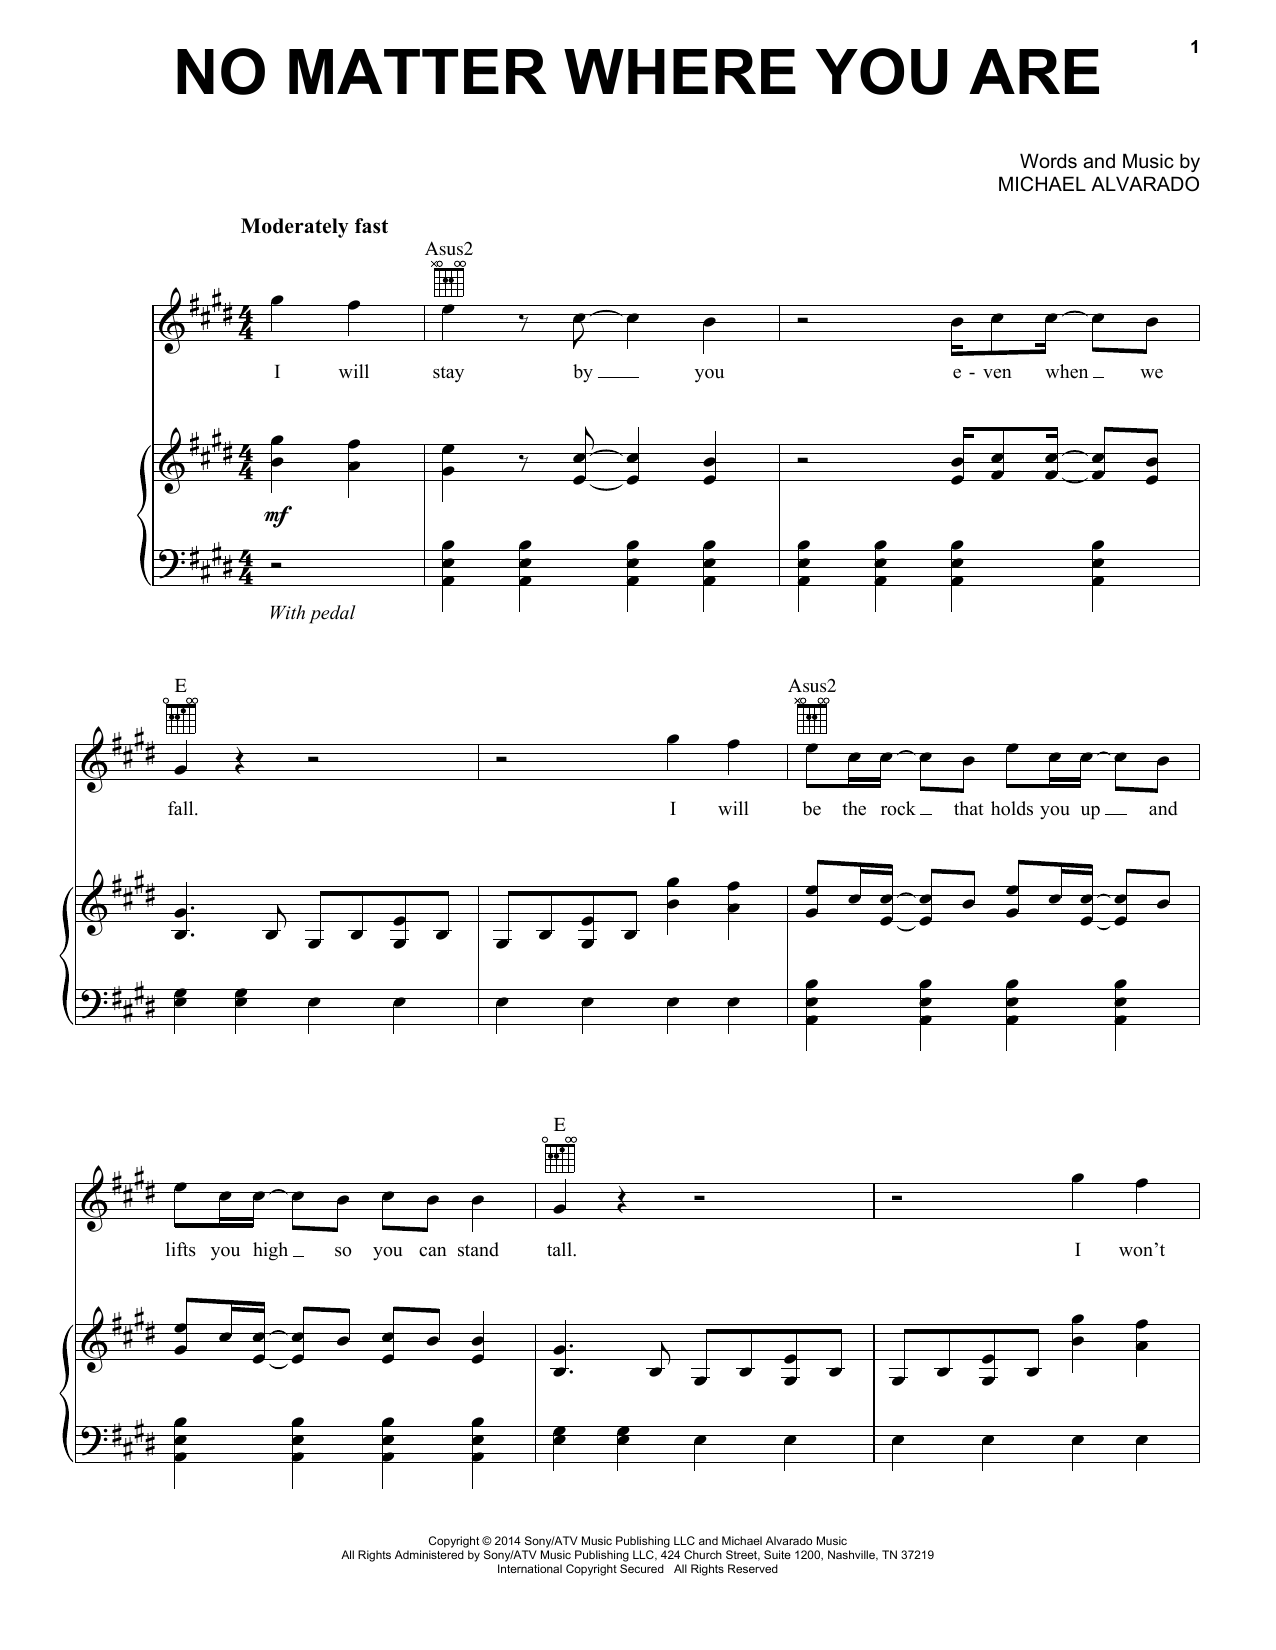 Download Us The Duo No Matter Where You Are Sheet Music